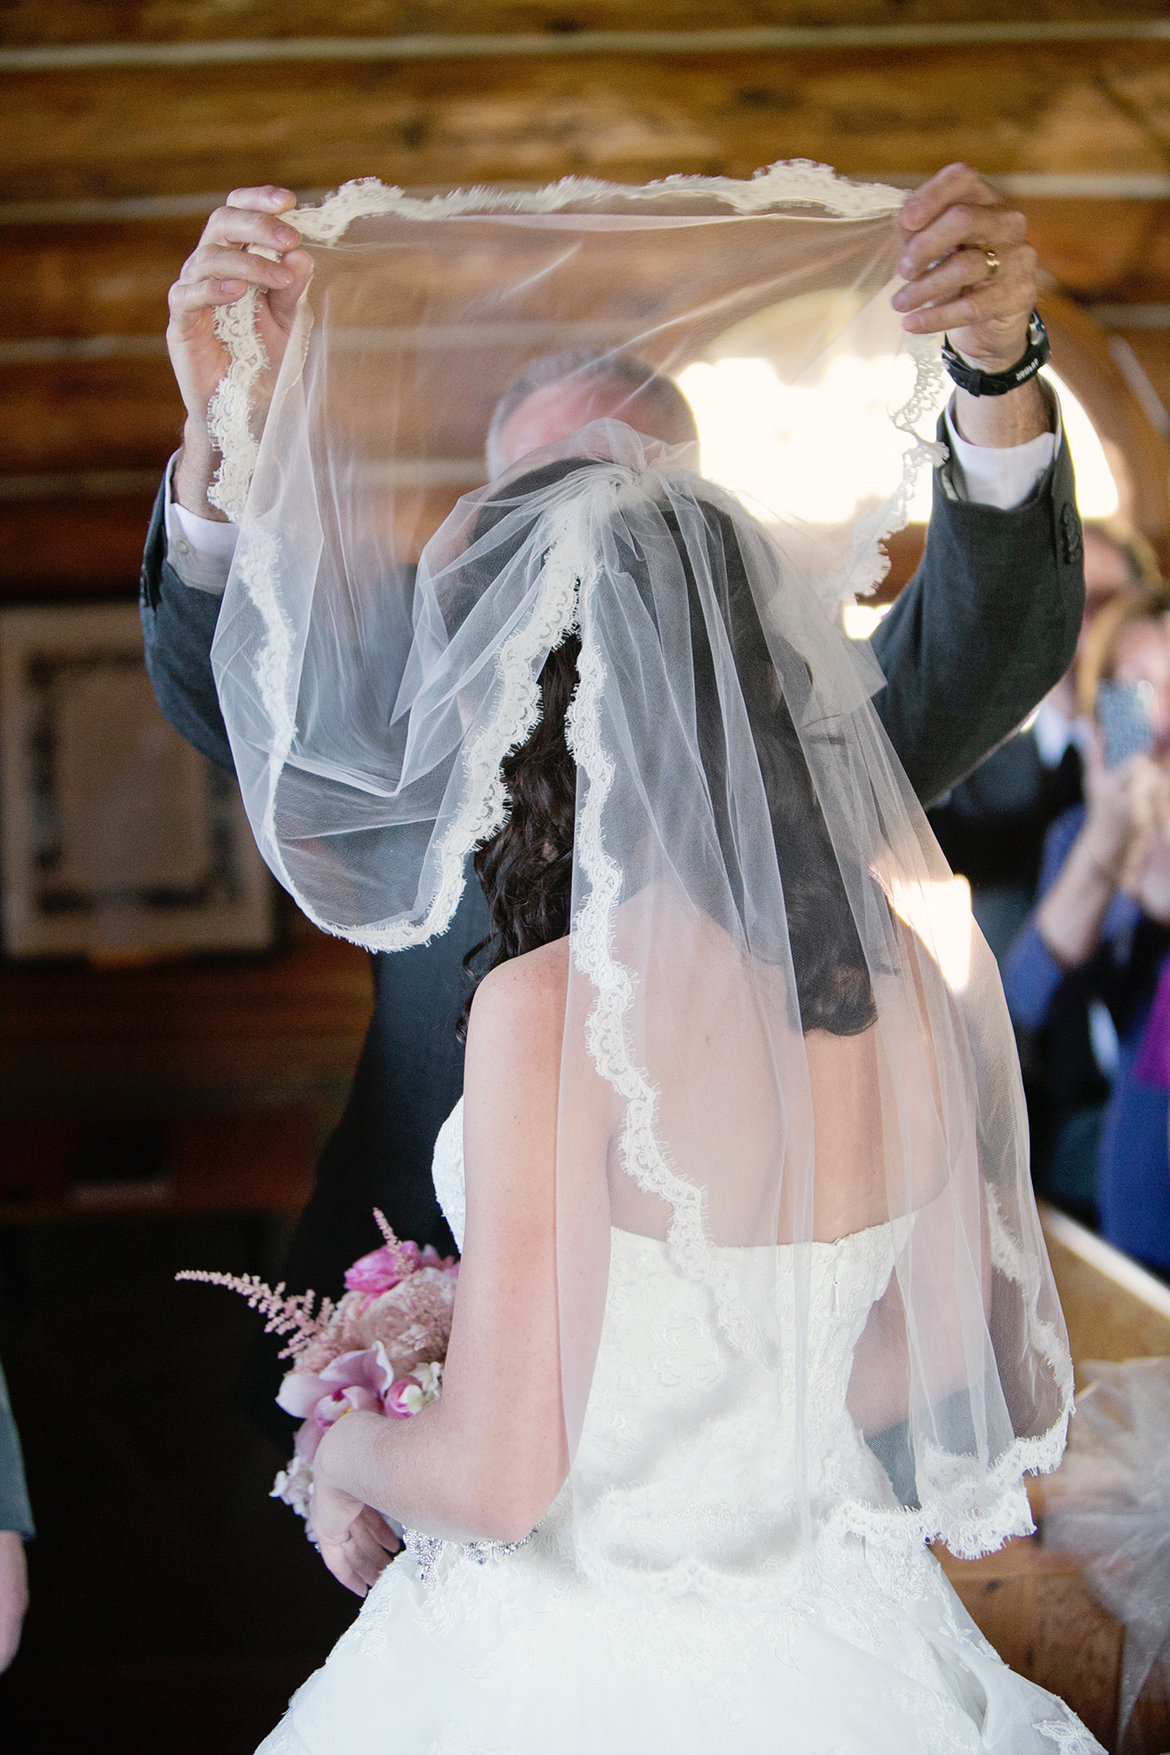 The Best Time to Take Off Your Wedding Veil